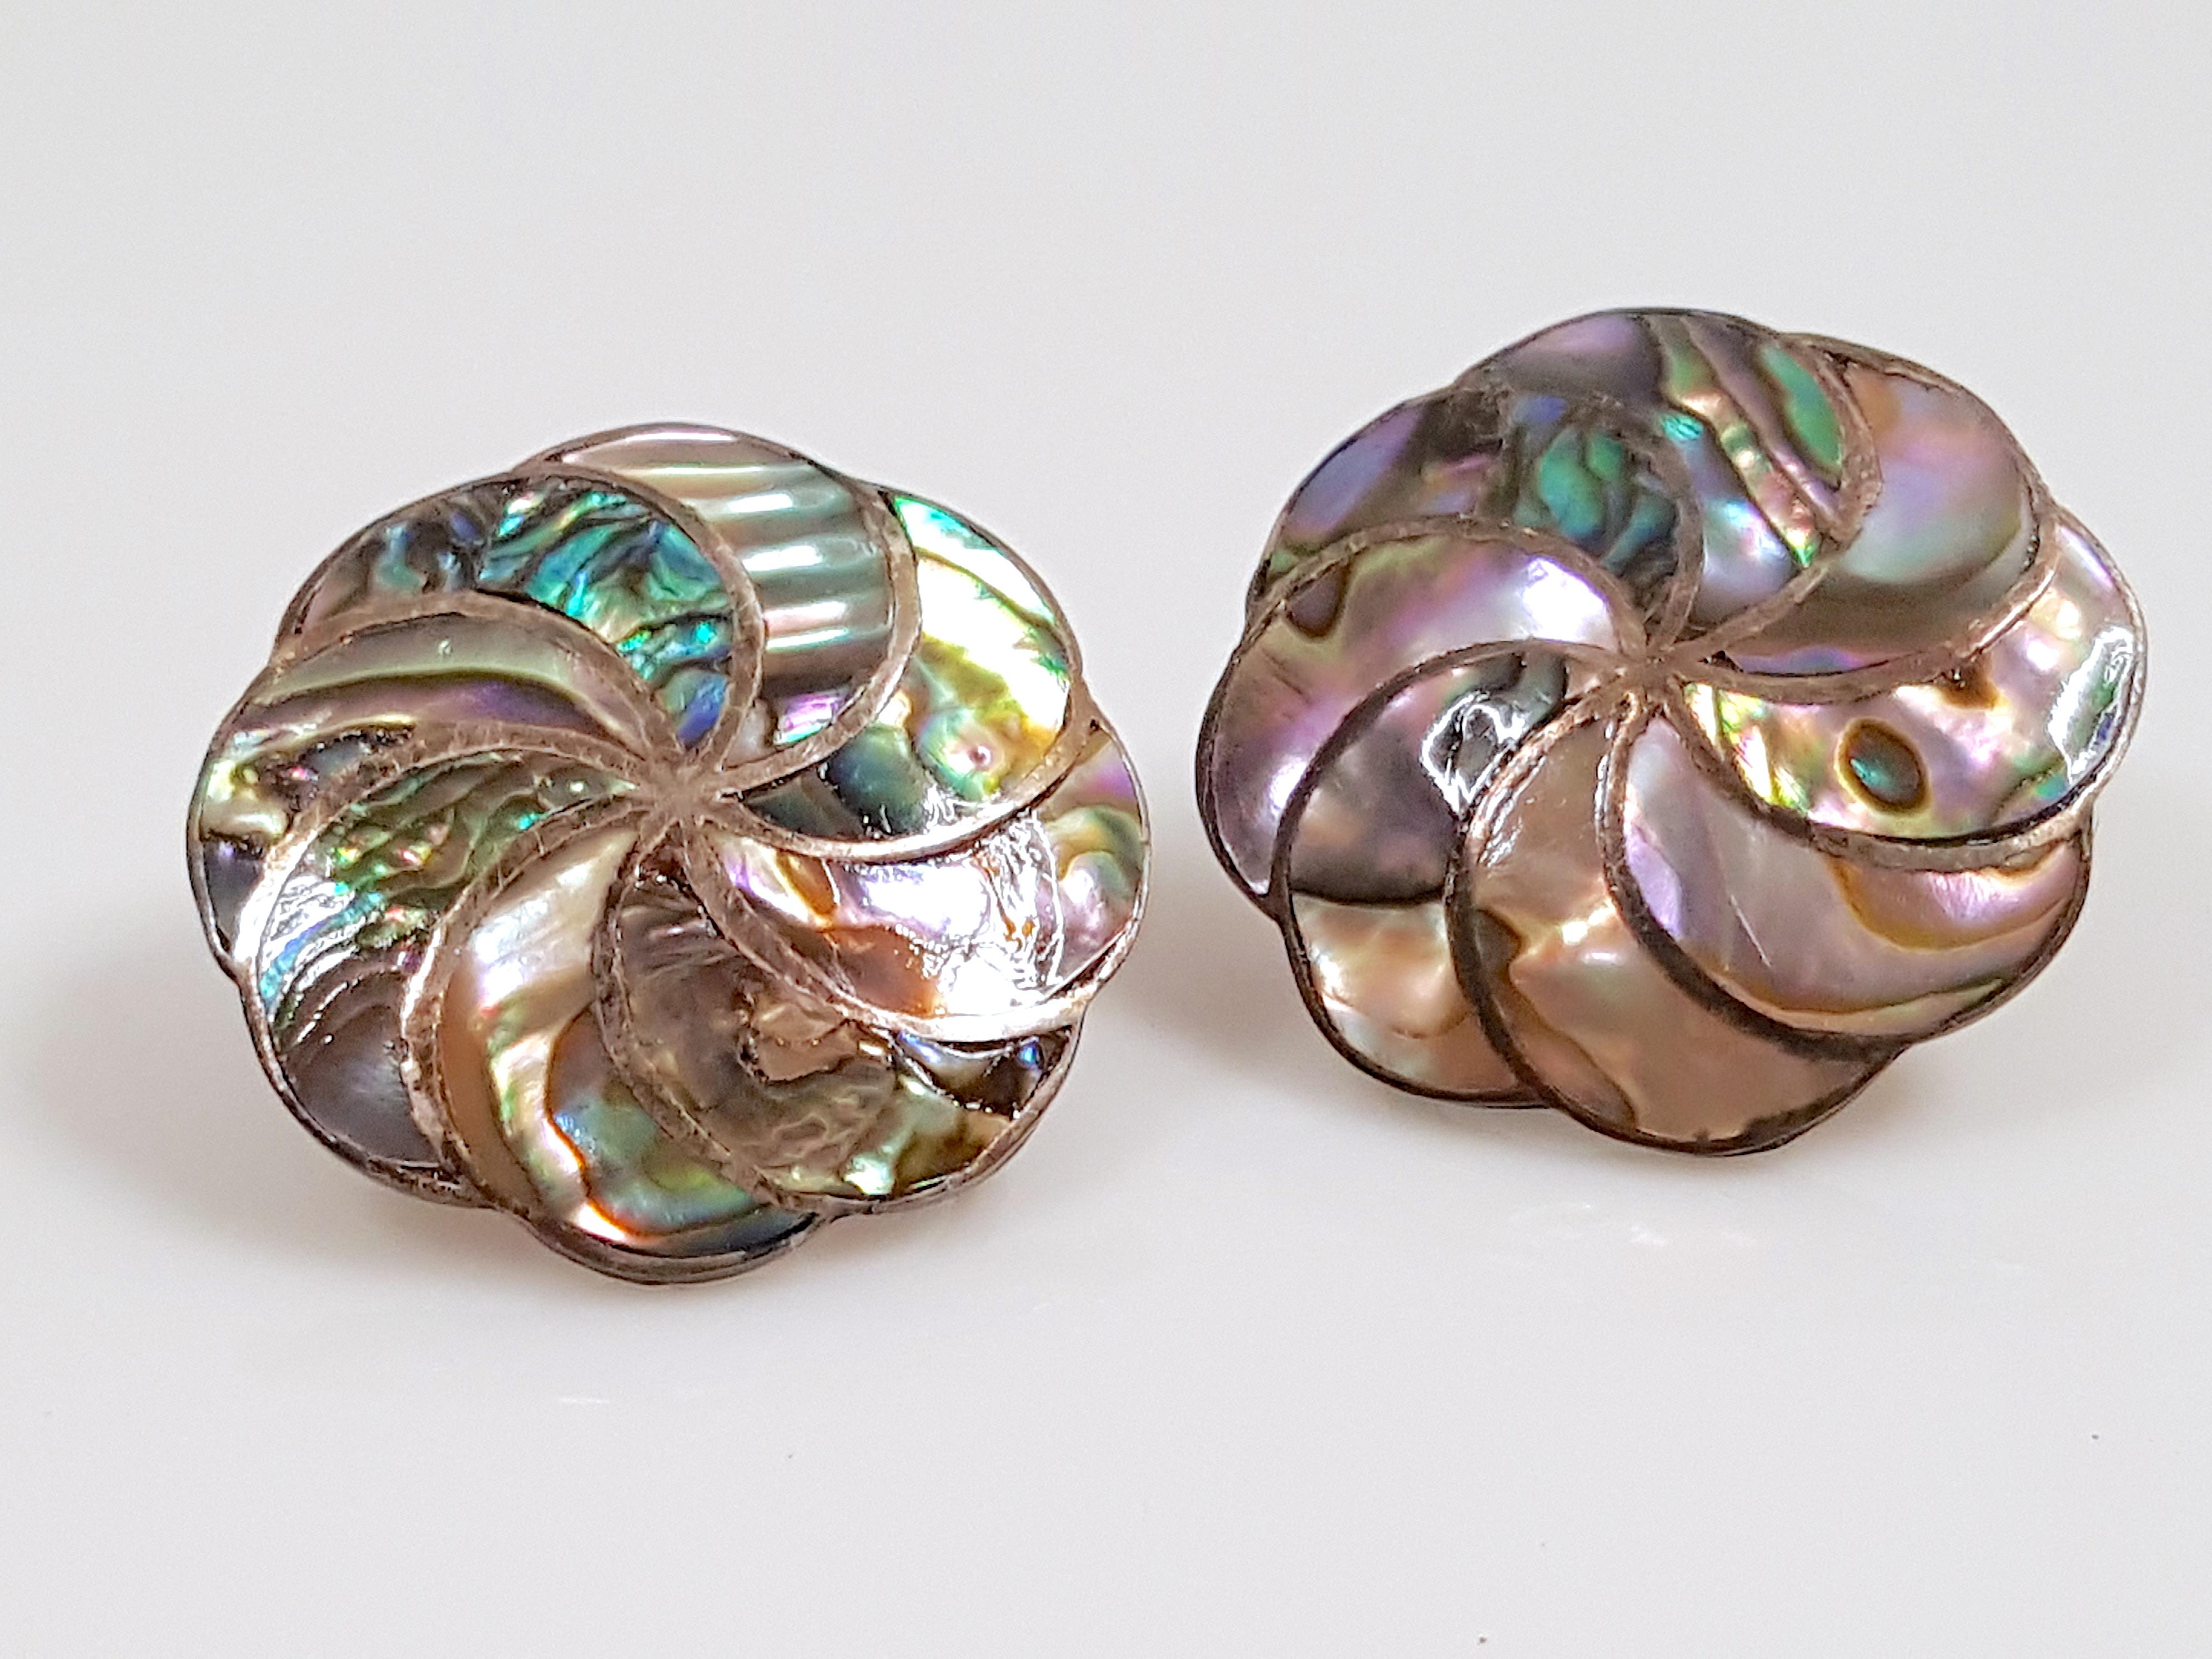 These signed antique Art-Nouveau period abalone shell sterling-silver screw-back earrings carry the maker's mark and initials of Dutch A.S. Agsteribbe, who worked in Amsterdam in The Netherlands in the early 20th Century. The mother-of-pearl is